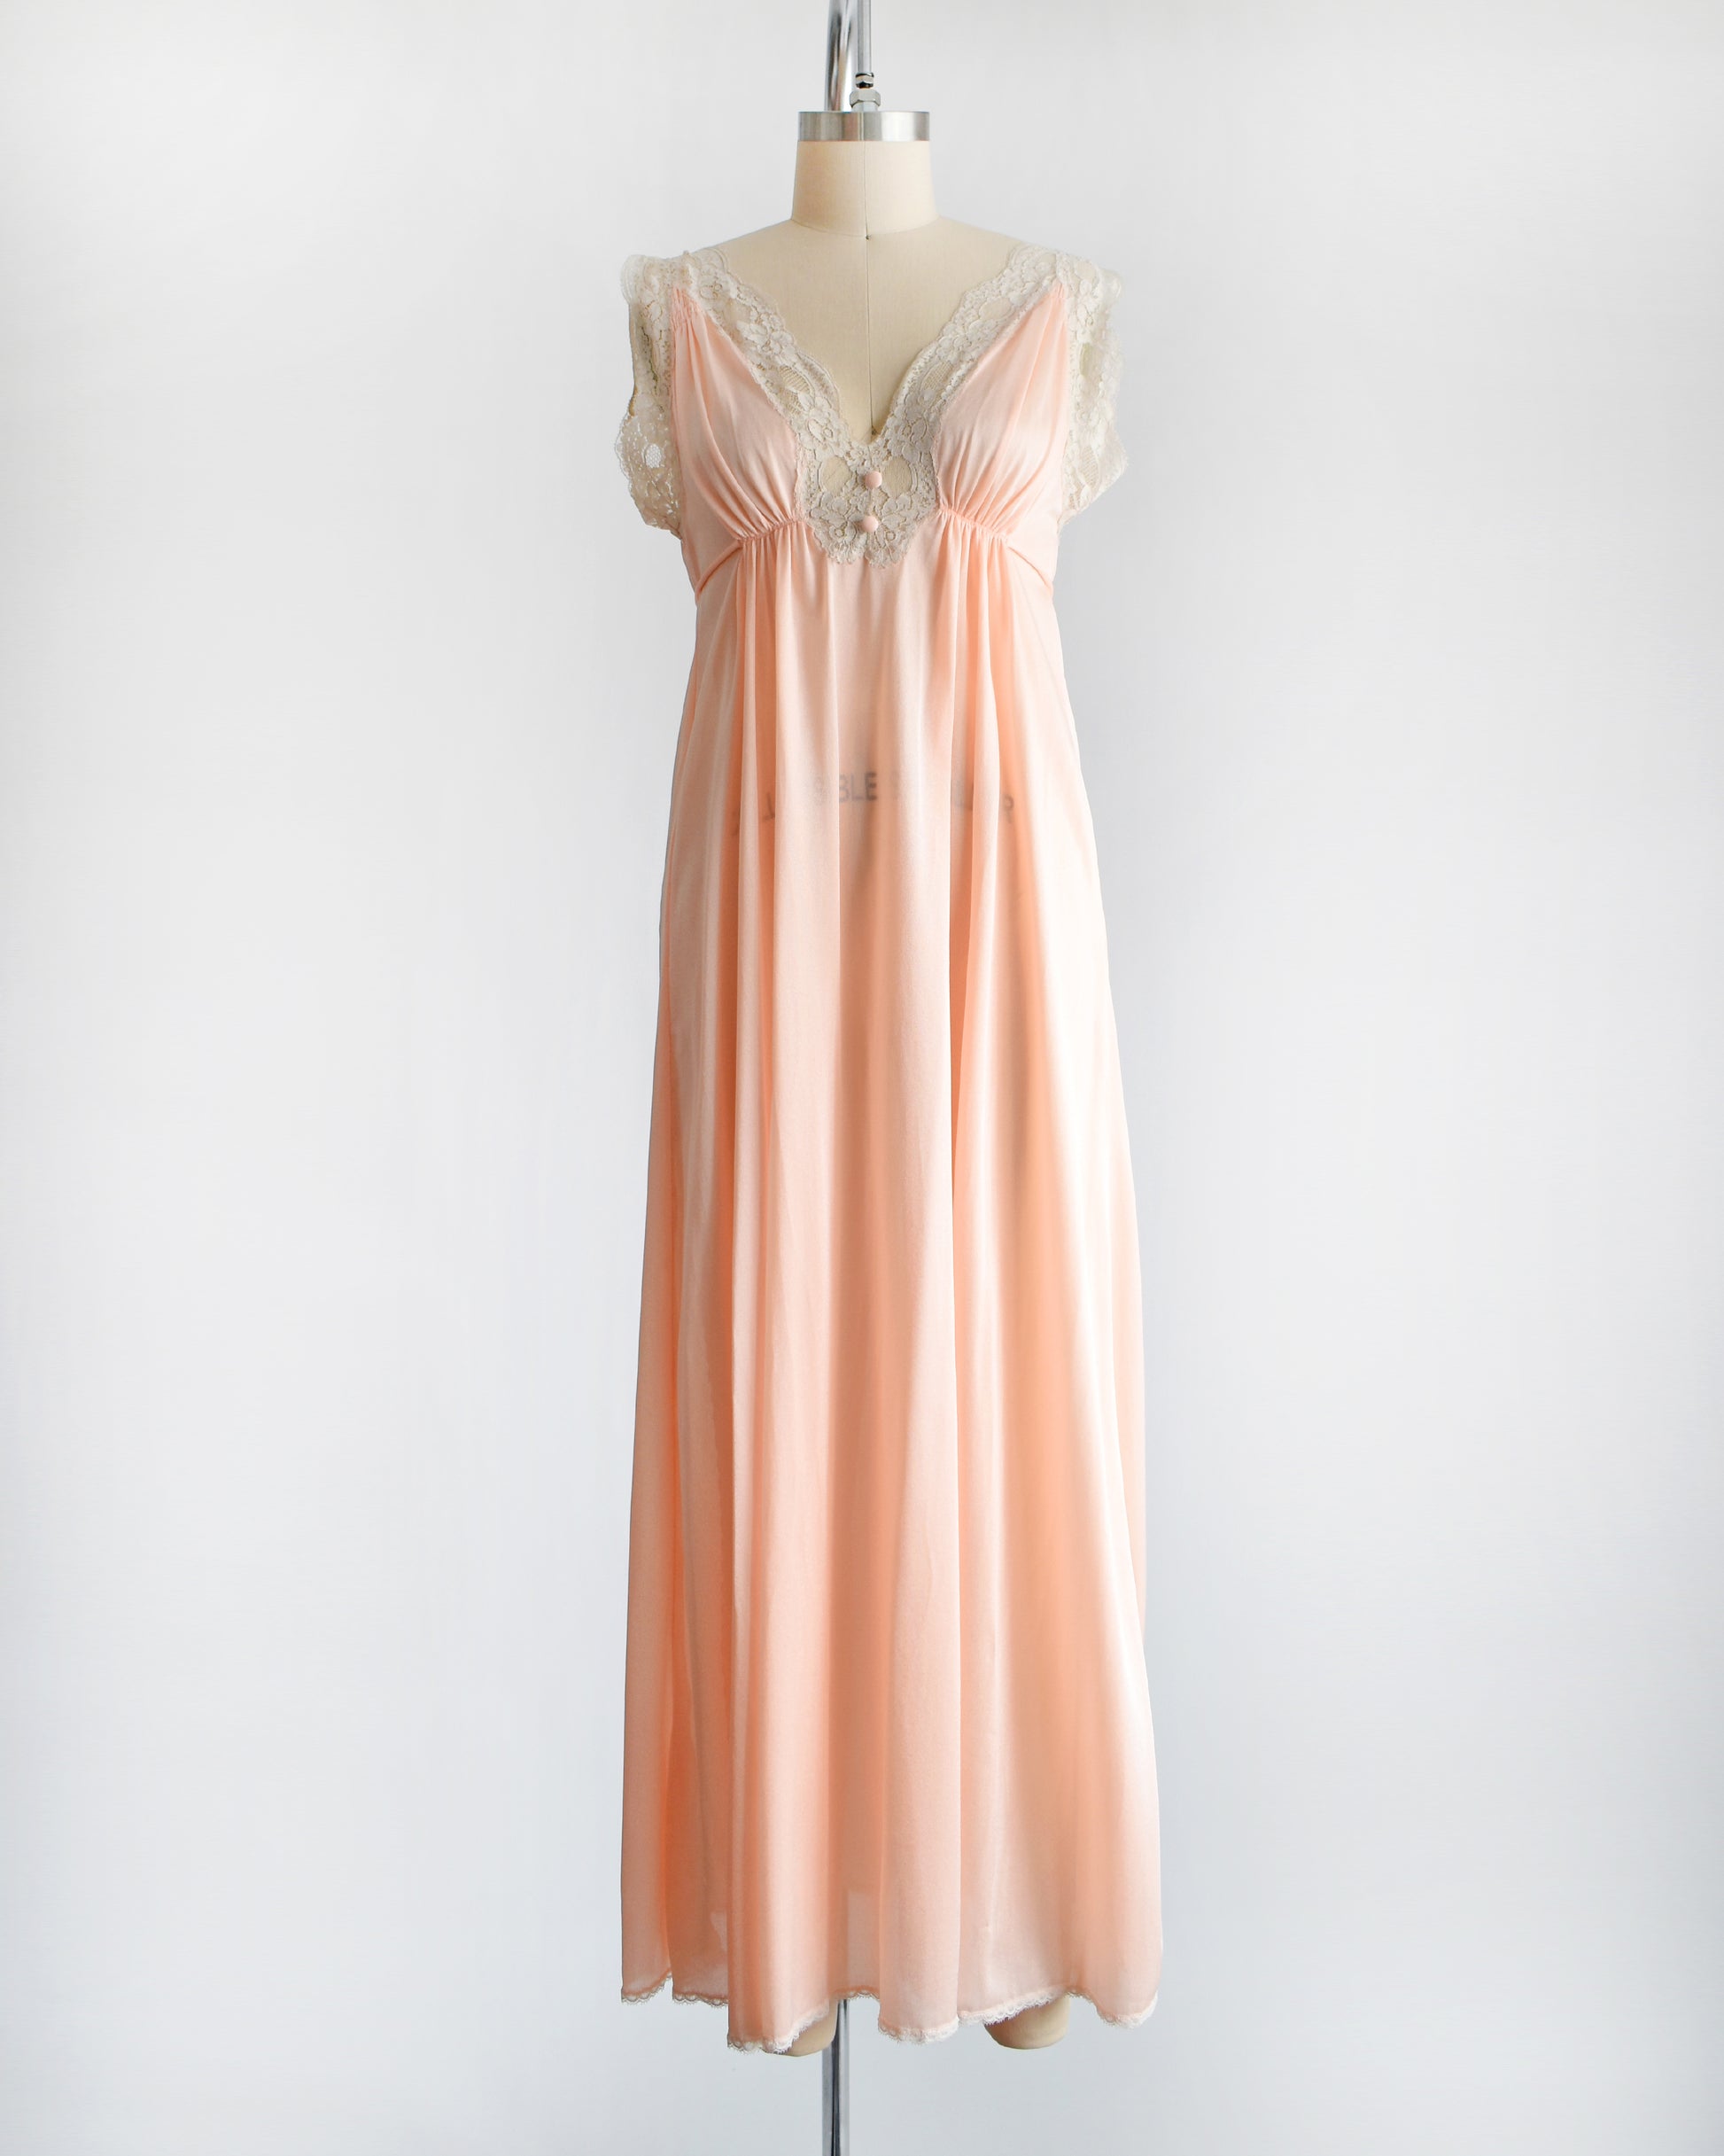 A vintage 1970s peach nightgown with lace trim